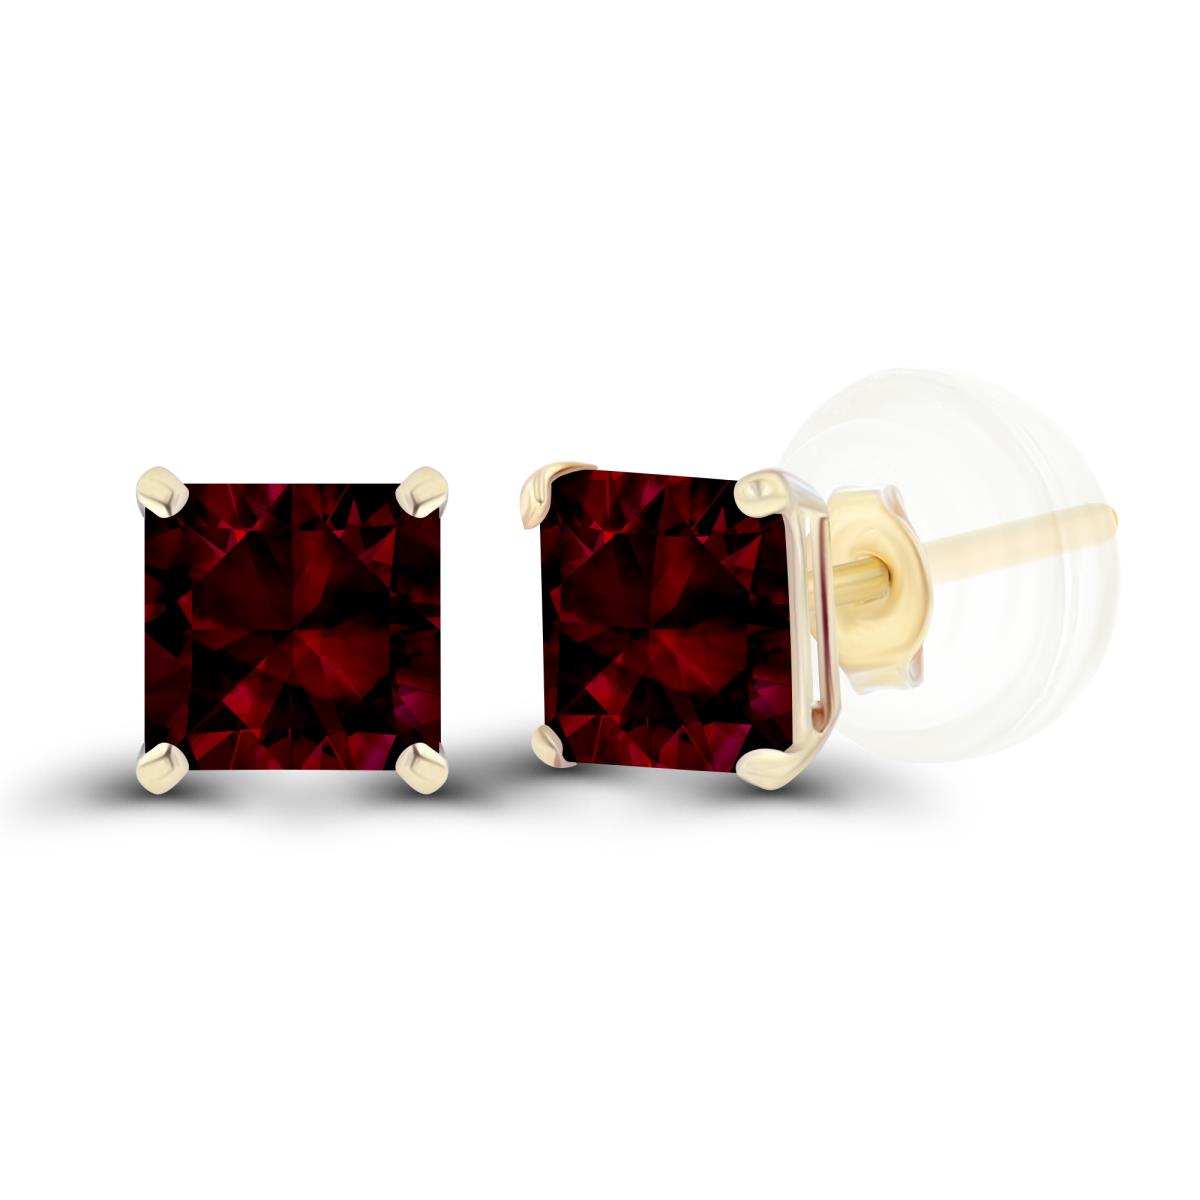 14K Yellow Gold 4mm Square Garnet Basket Stud Earrings with Silicone Back